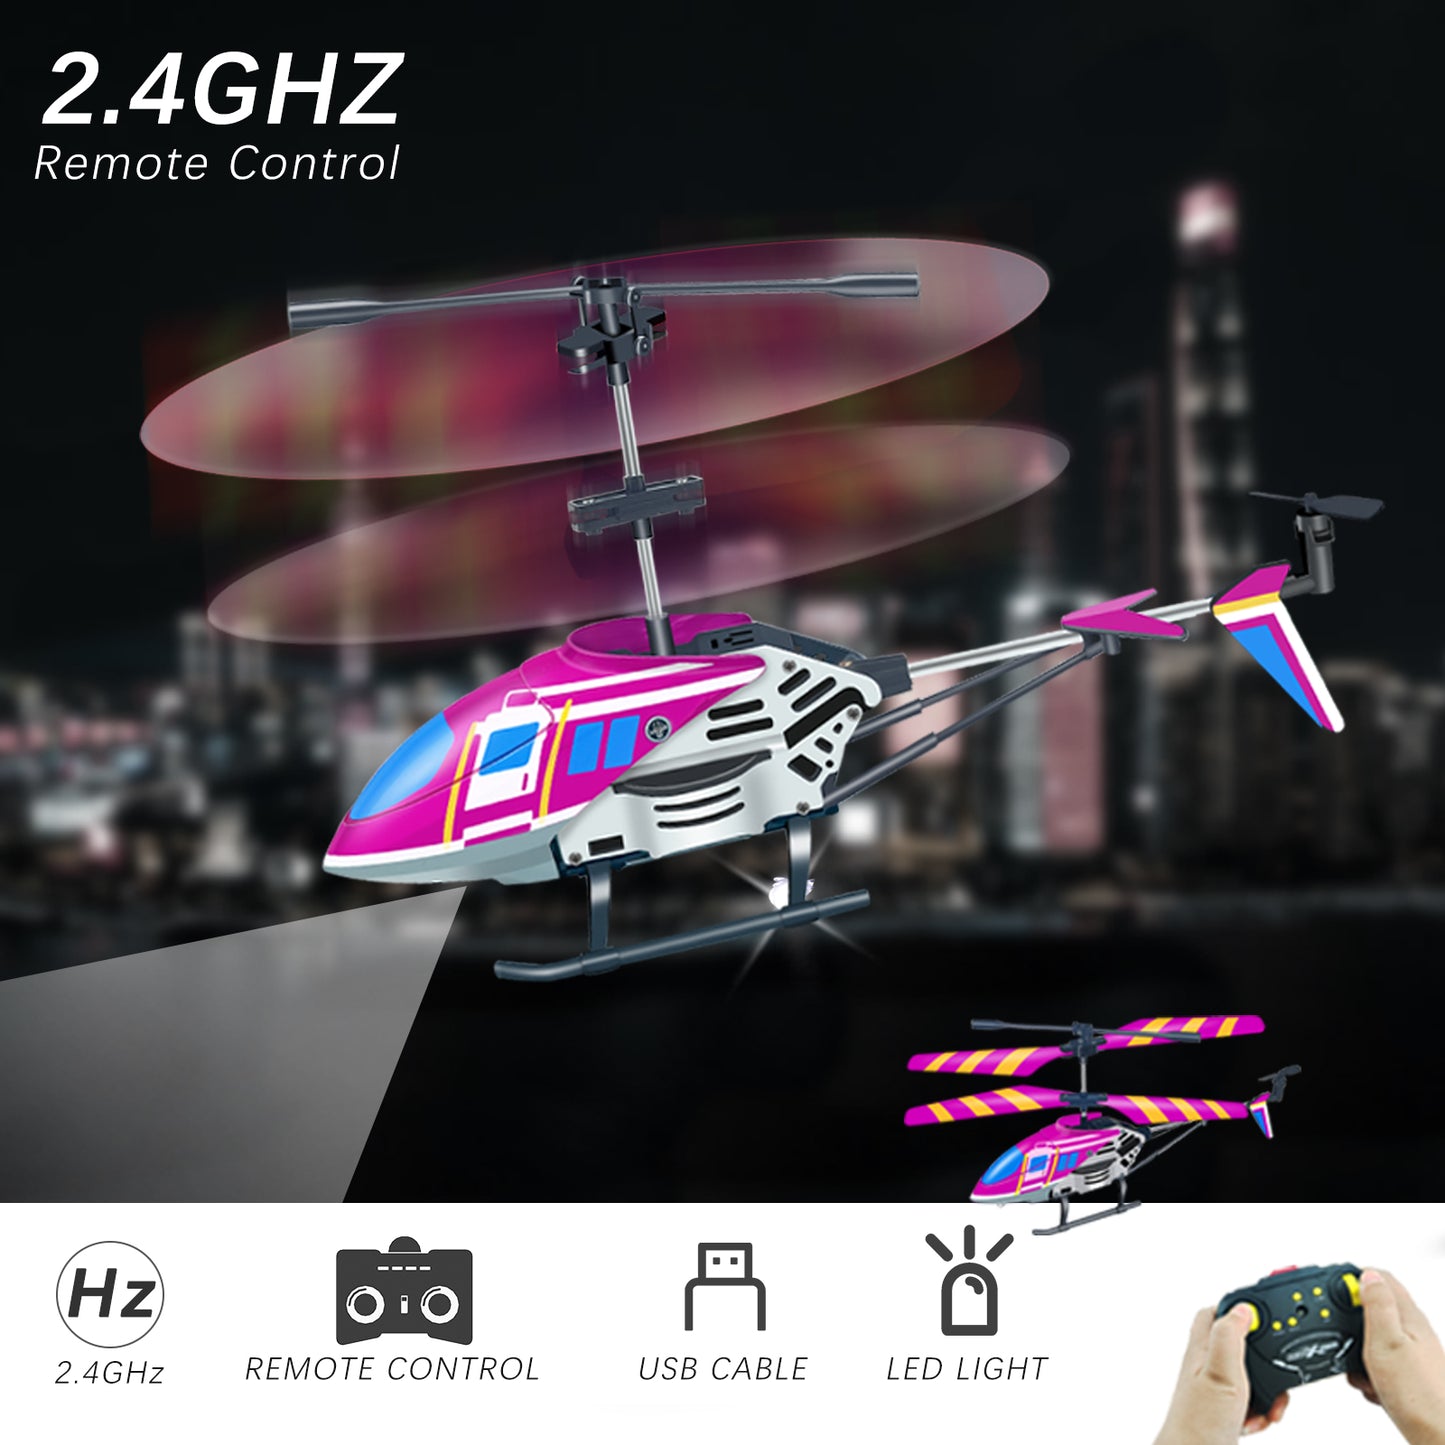 "Remote Control Helicopter, RC Flying Toys for 6 7 8 9 Teens Years Old Boys Girls Birthday, 3.5 Channel RC Helicopter with Gyro for Kids Adults Beginner Flying Stabilizer Indoor-Purple "